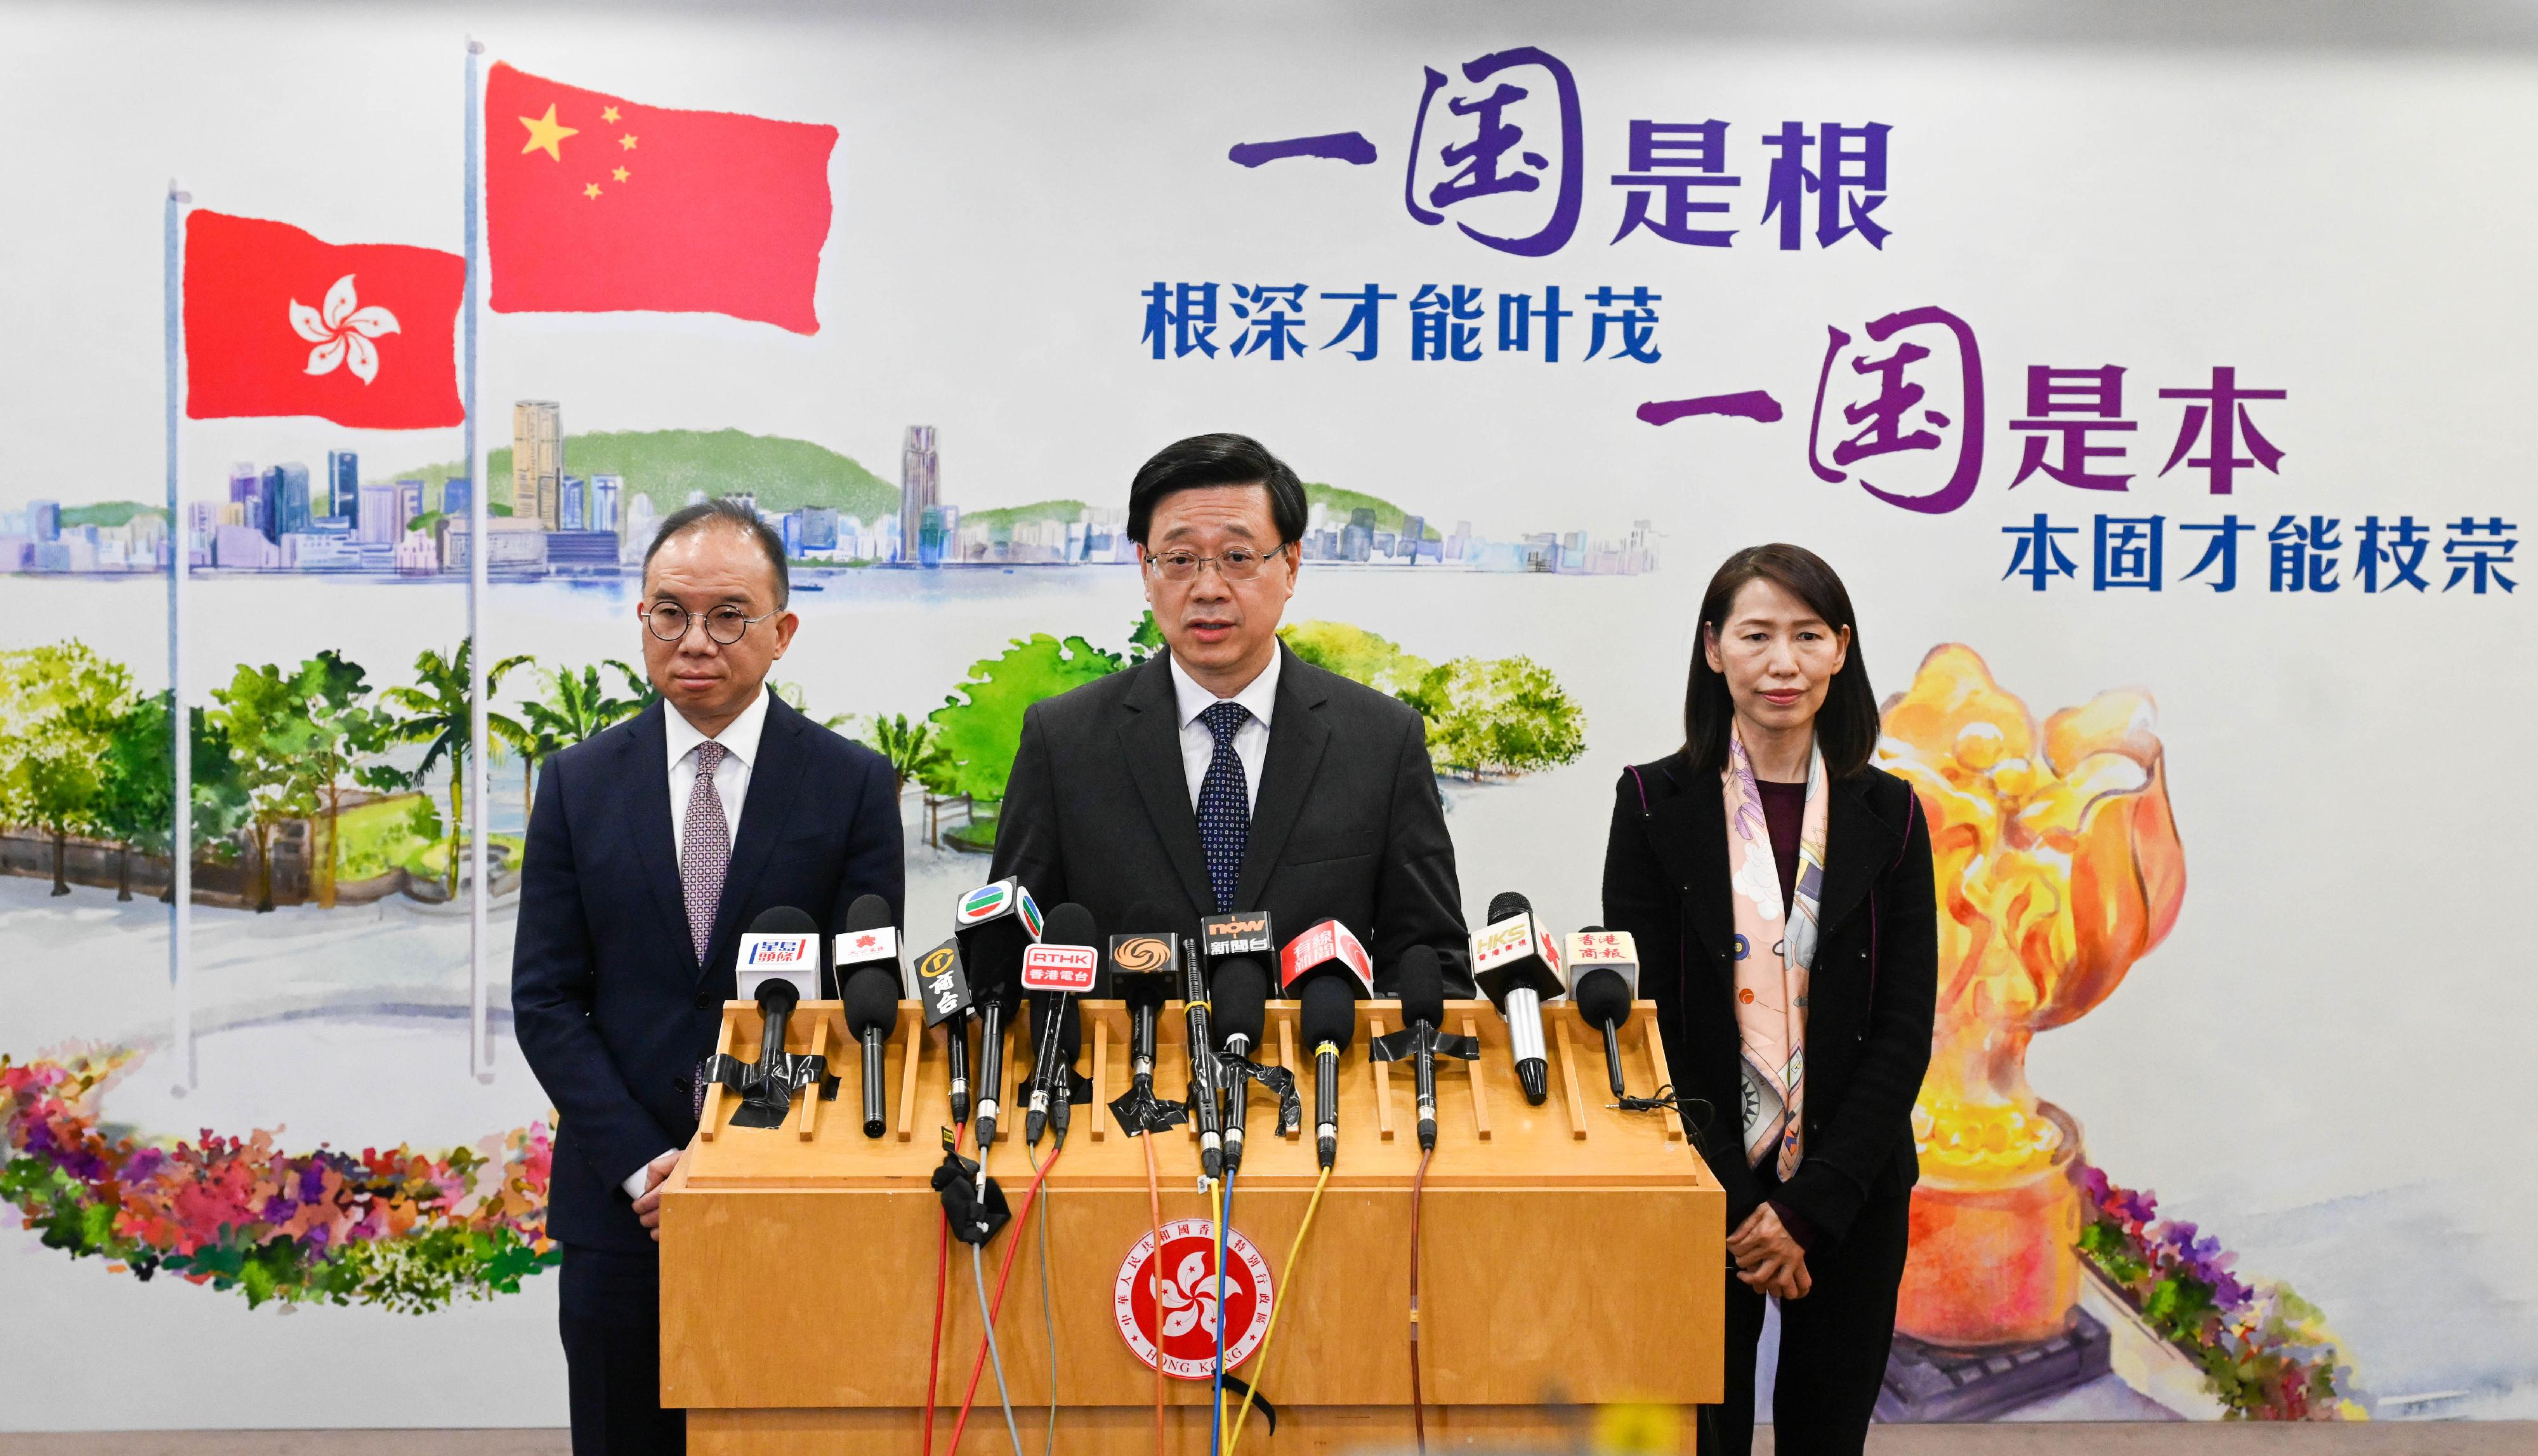 The Chief Executive, Mr John Lee (centre), accompanied by the Secretary for Constitutional and Mainland Affairs, Mr Erick Tsang Kwok-wai (left), and the Director of the Chief Executive's Office, Ms Carol Yip (right), meets the media in Beijing today (March 17).